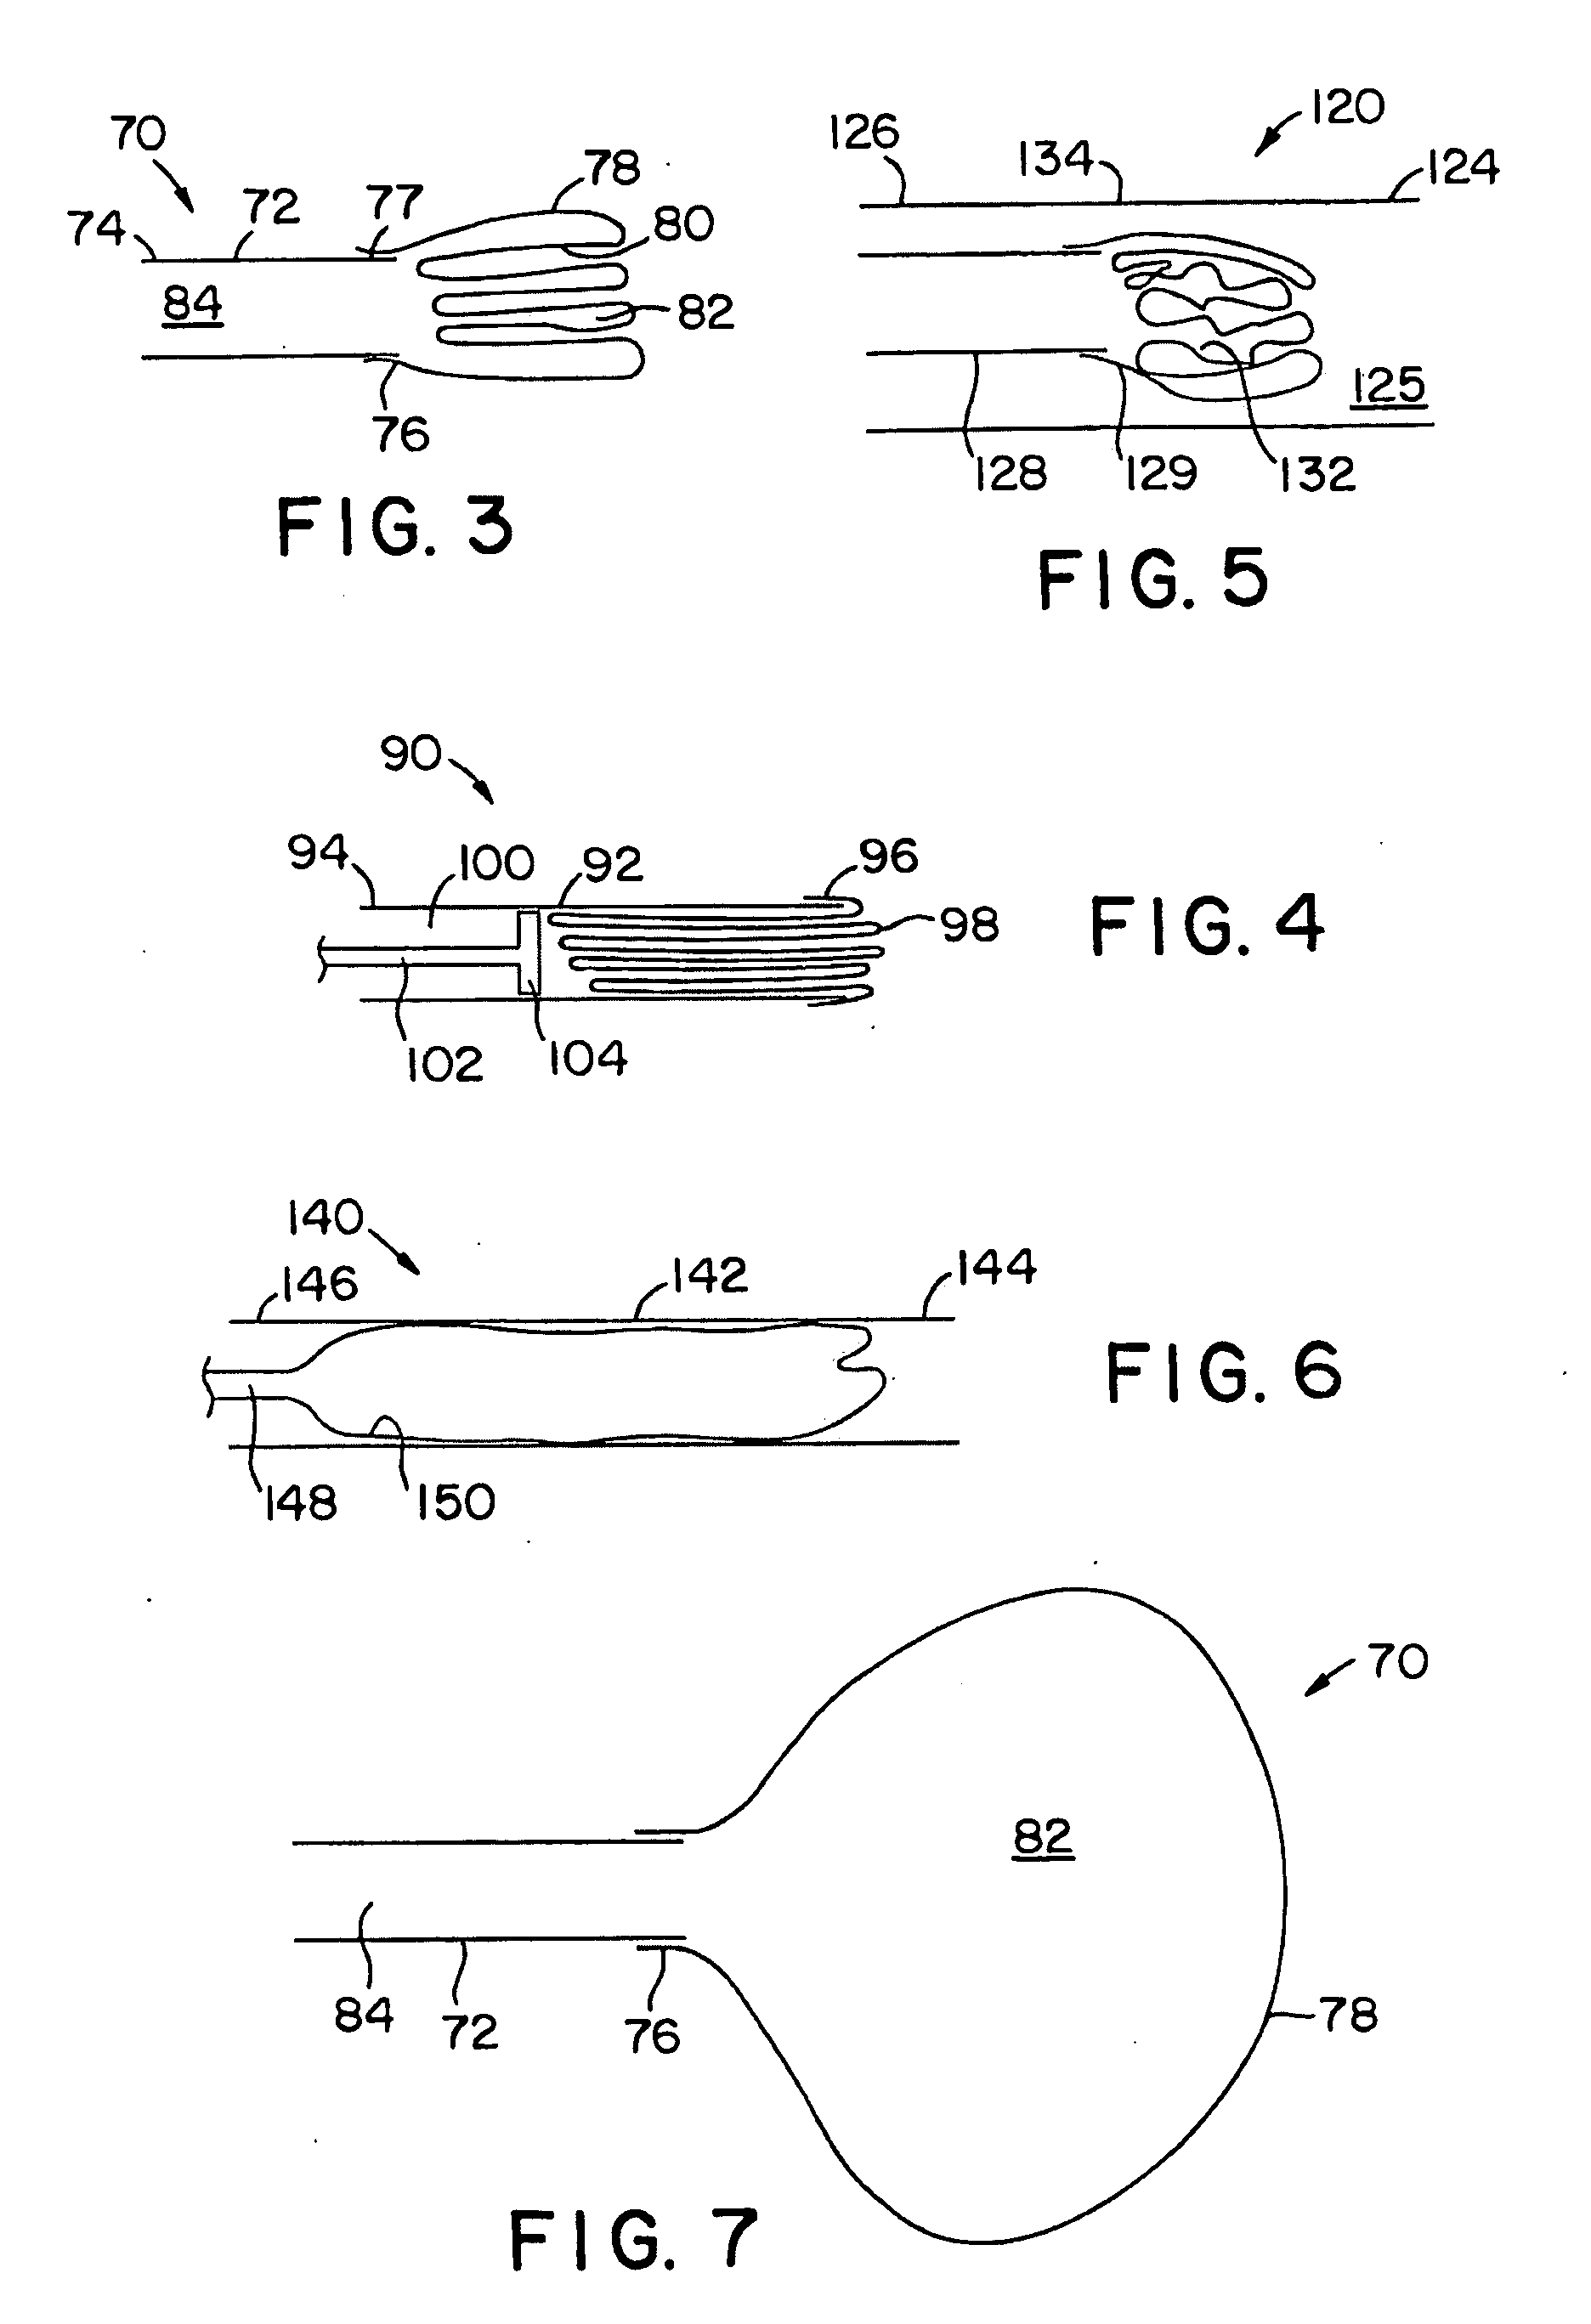 Endocardial Dispersive Electrode for Use with a Monopolar RF Ablation Pen